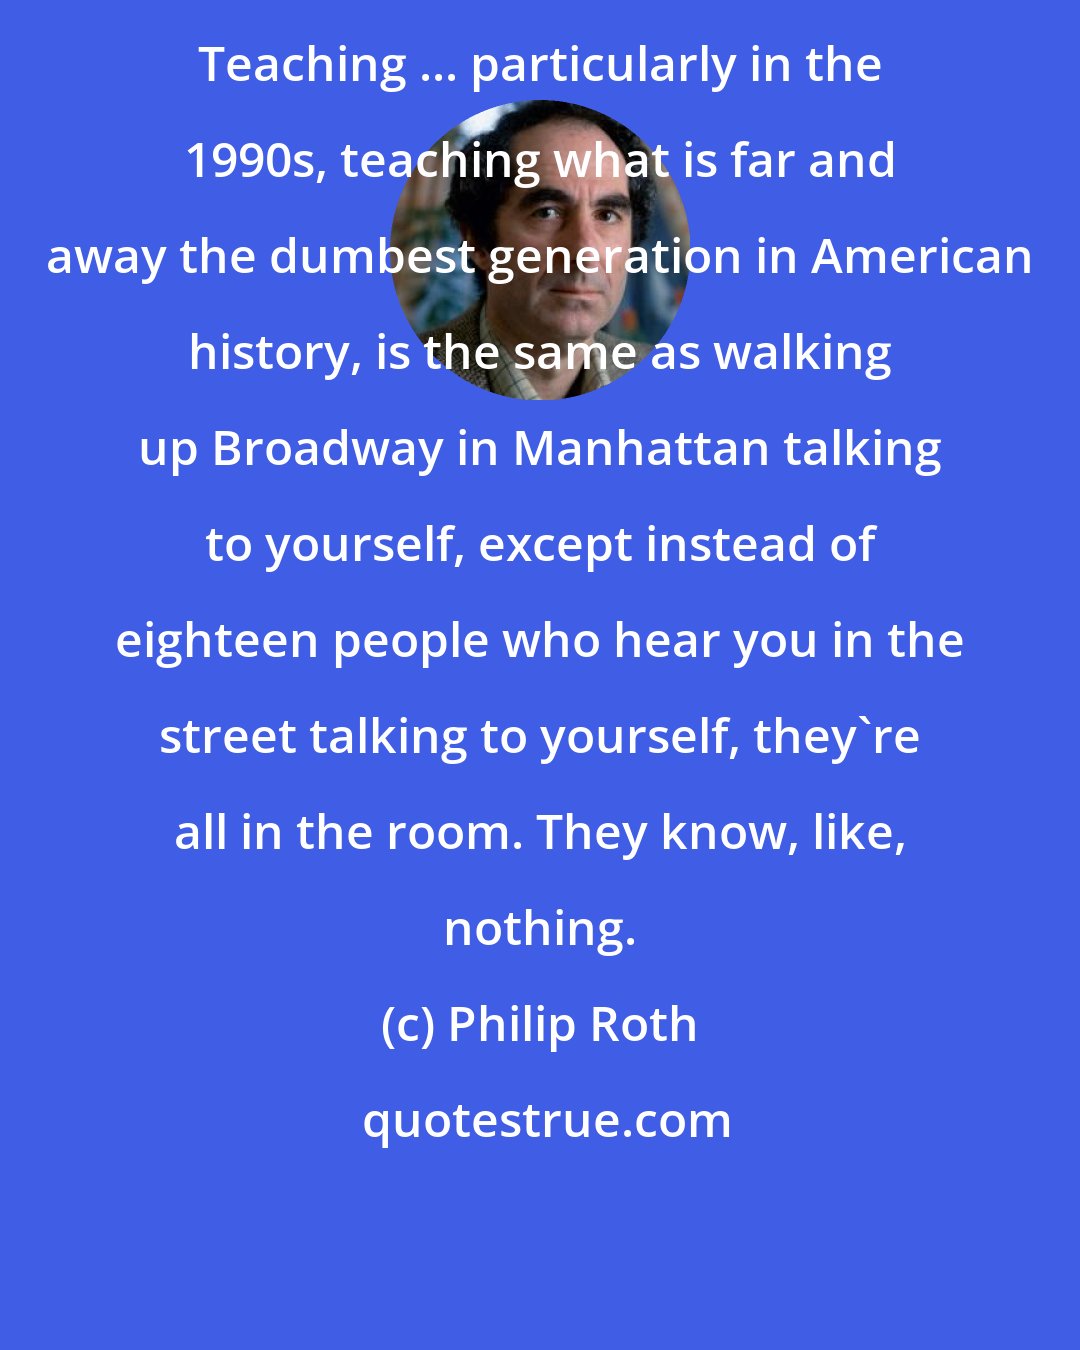 Philip Roth: Teaching ... particularly in the 1990s, teaching what is far and away the dumbest generation in American history, is the same as walking up Broadway in Manhattan talking to yourself, except instead of eighteen people who hear you in the street talking to yourself, they're all in the room. They know, like, nothing.